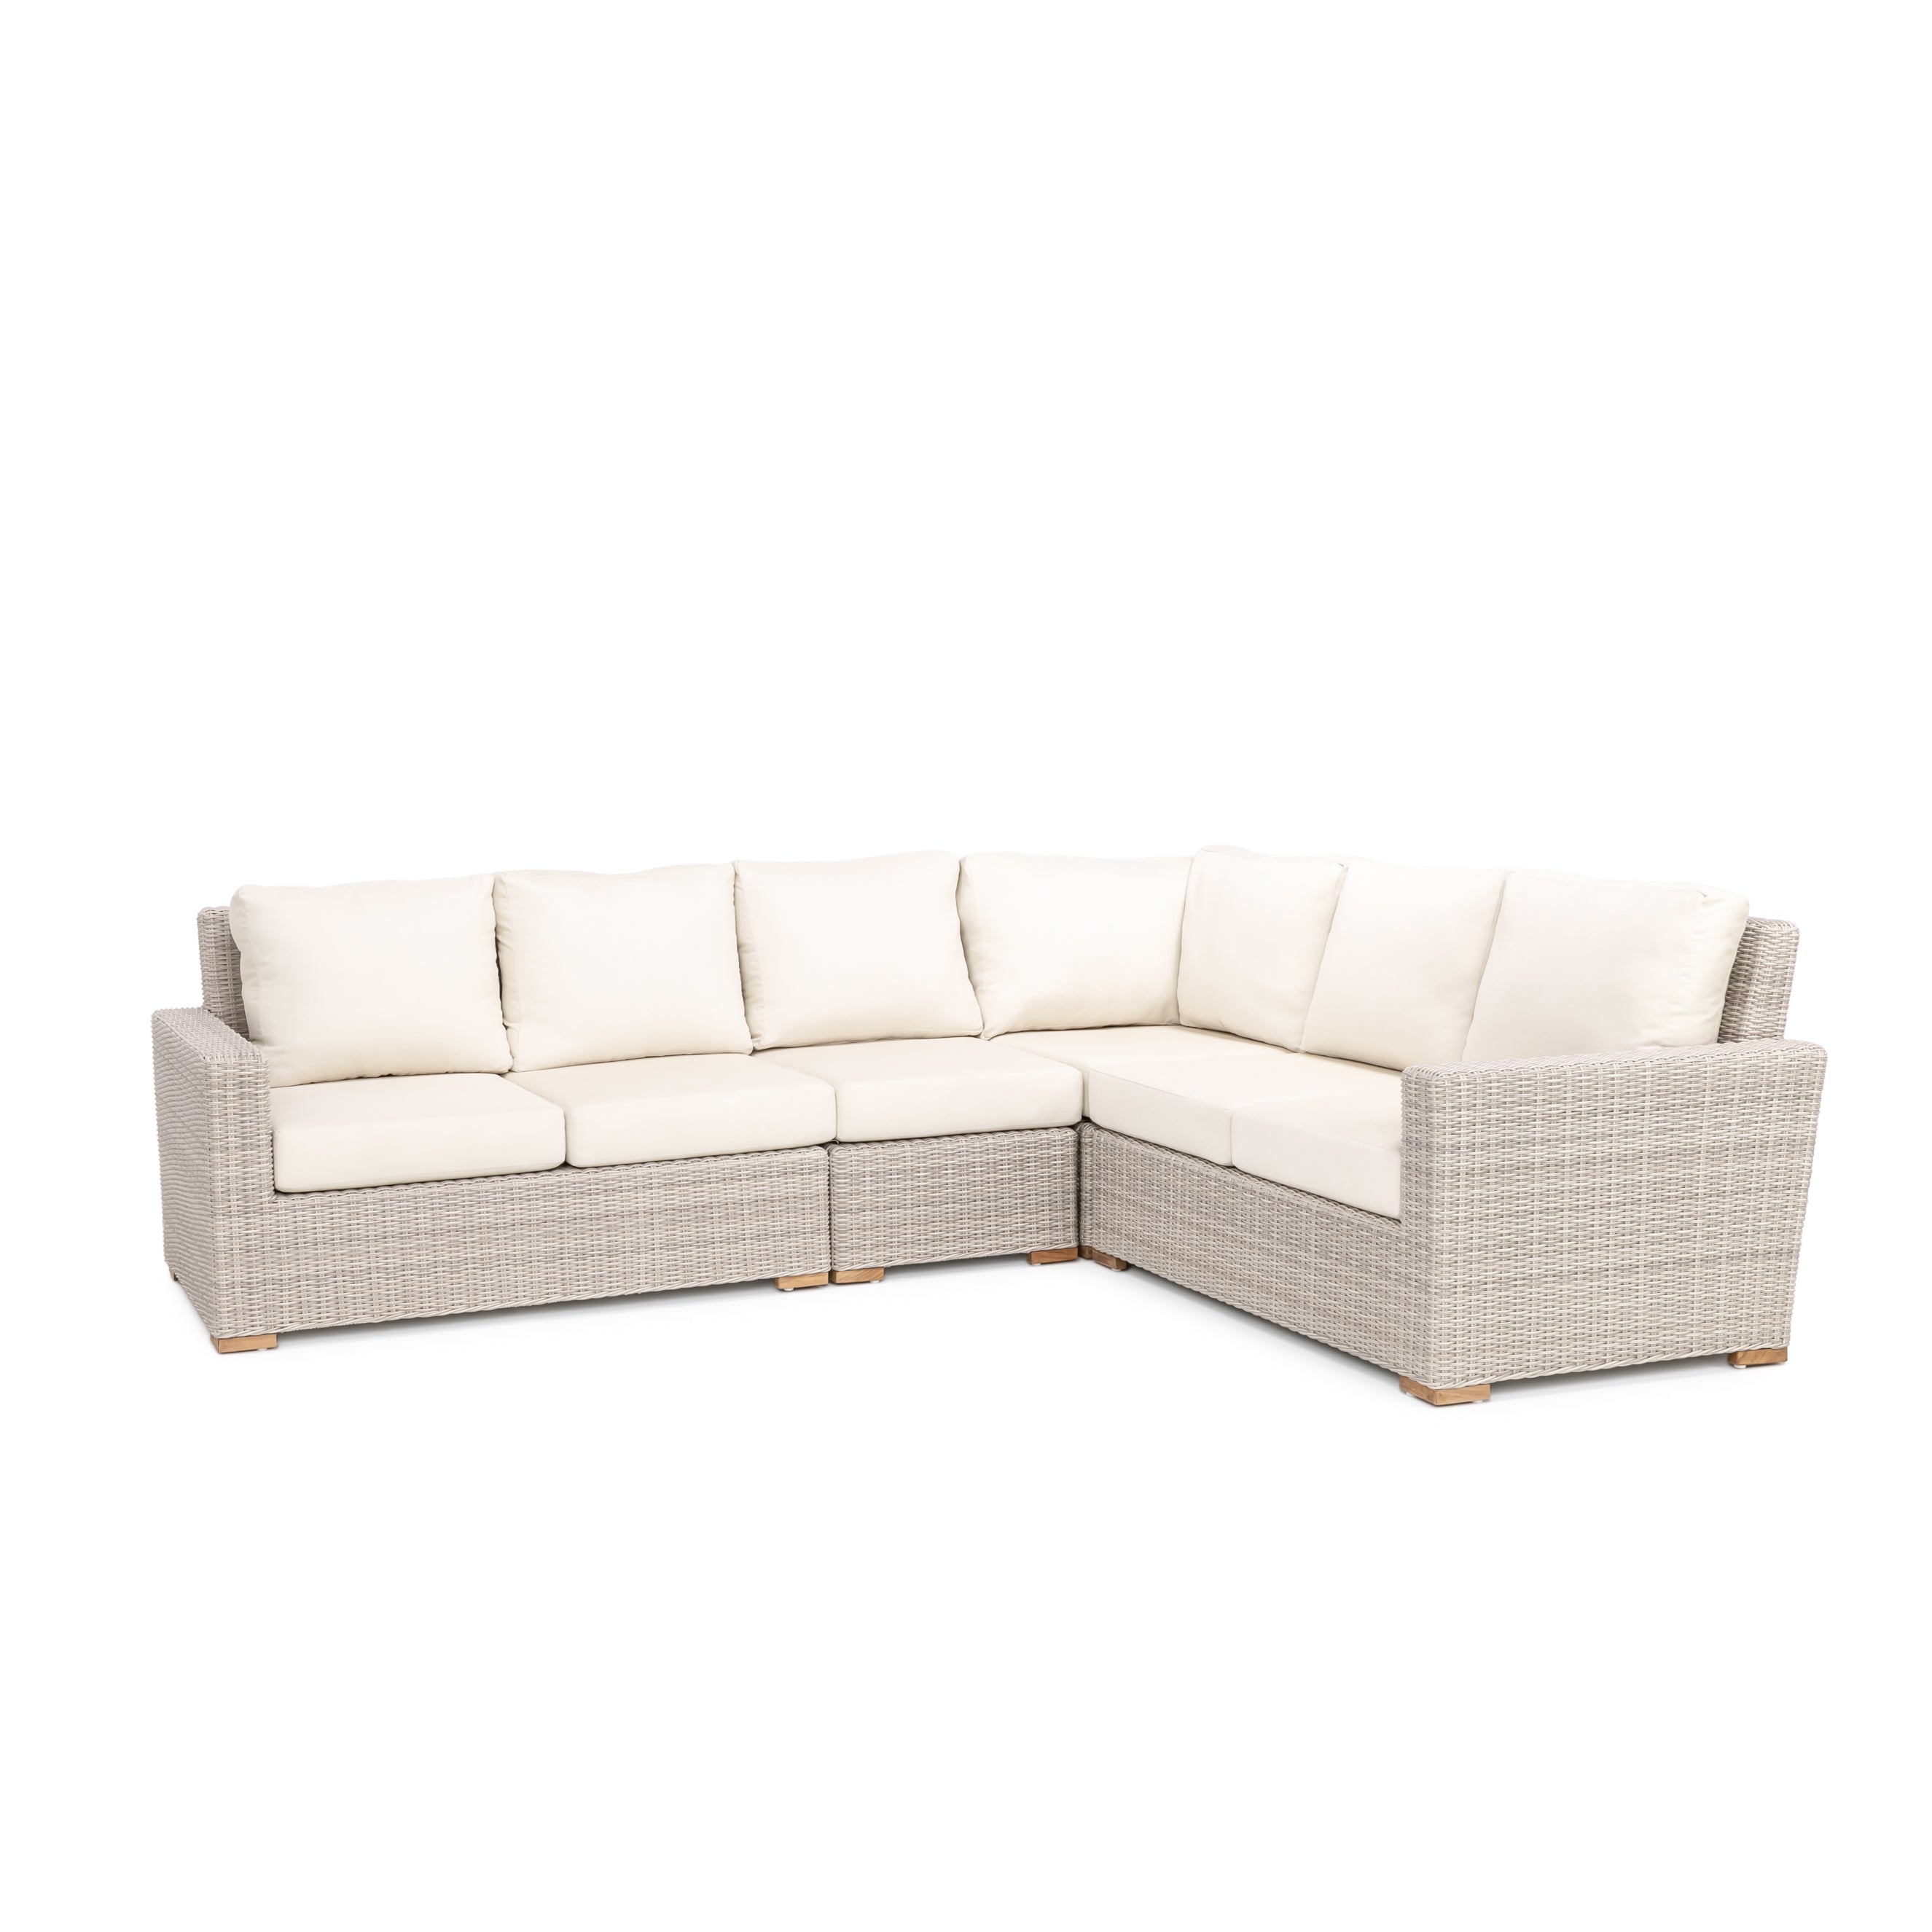 Oyster Bay Sectional